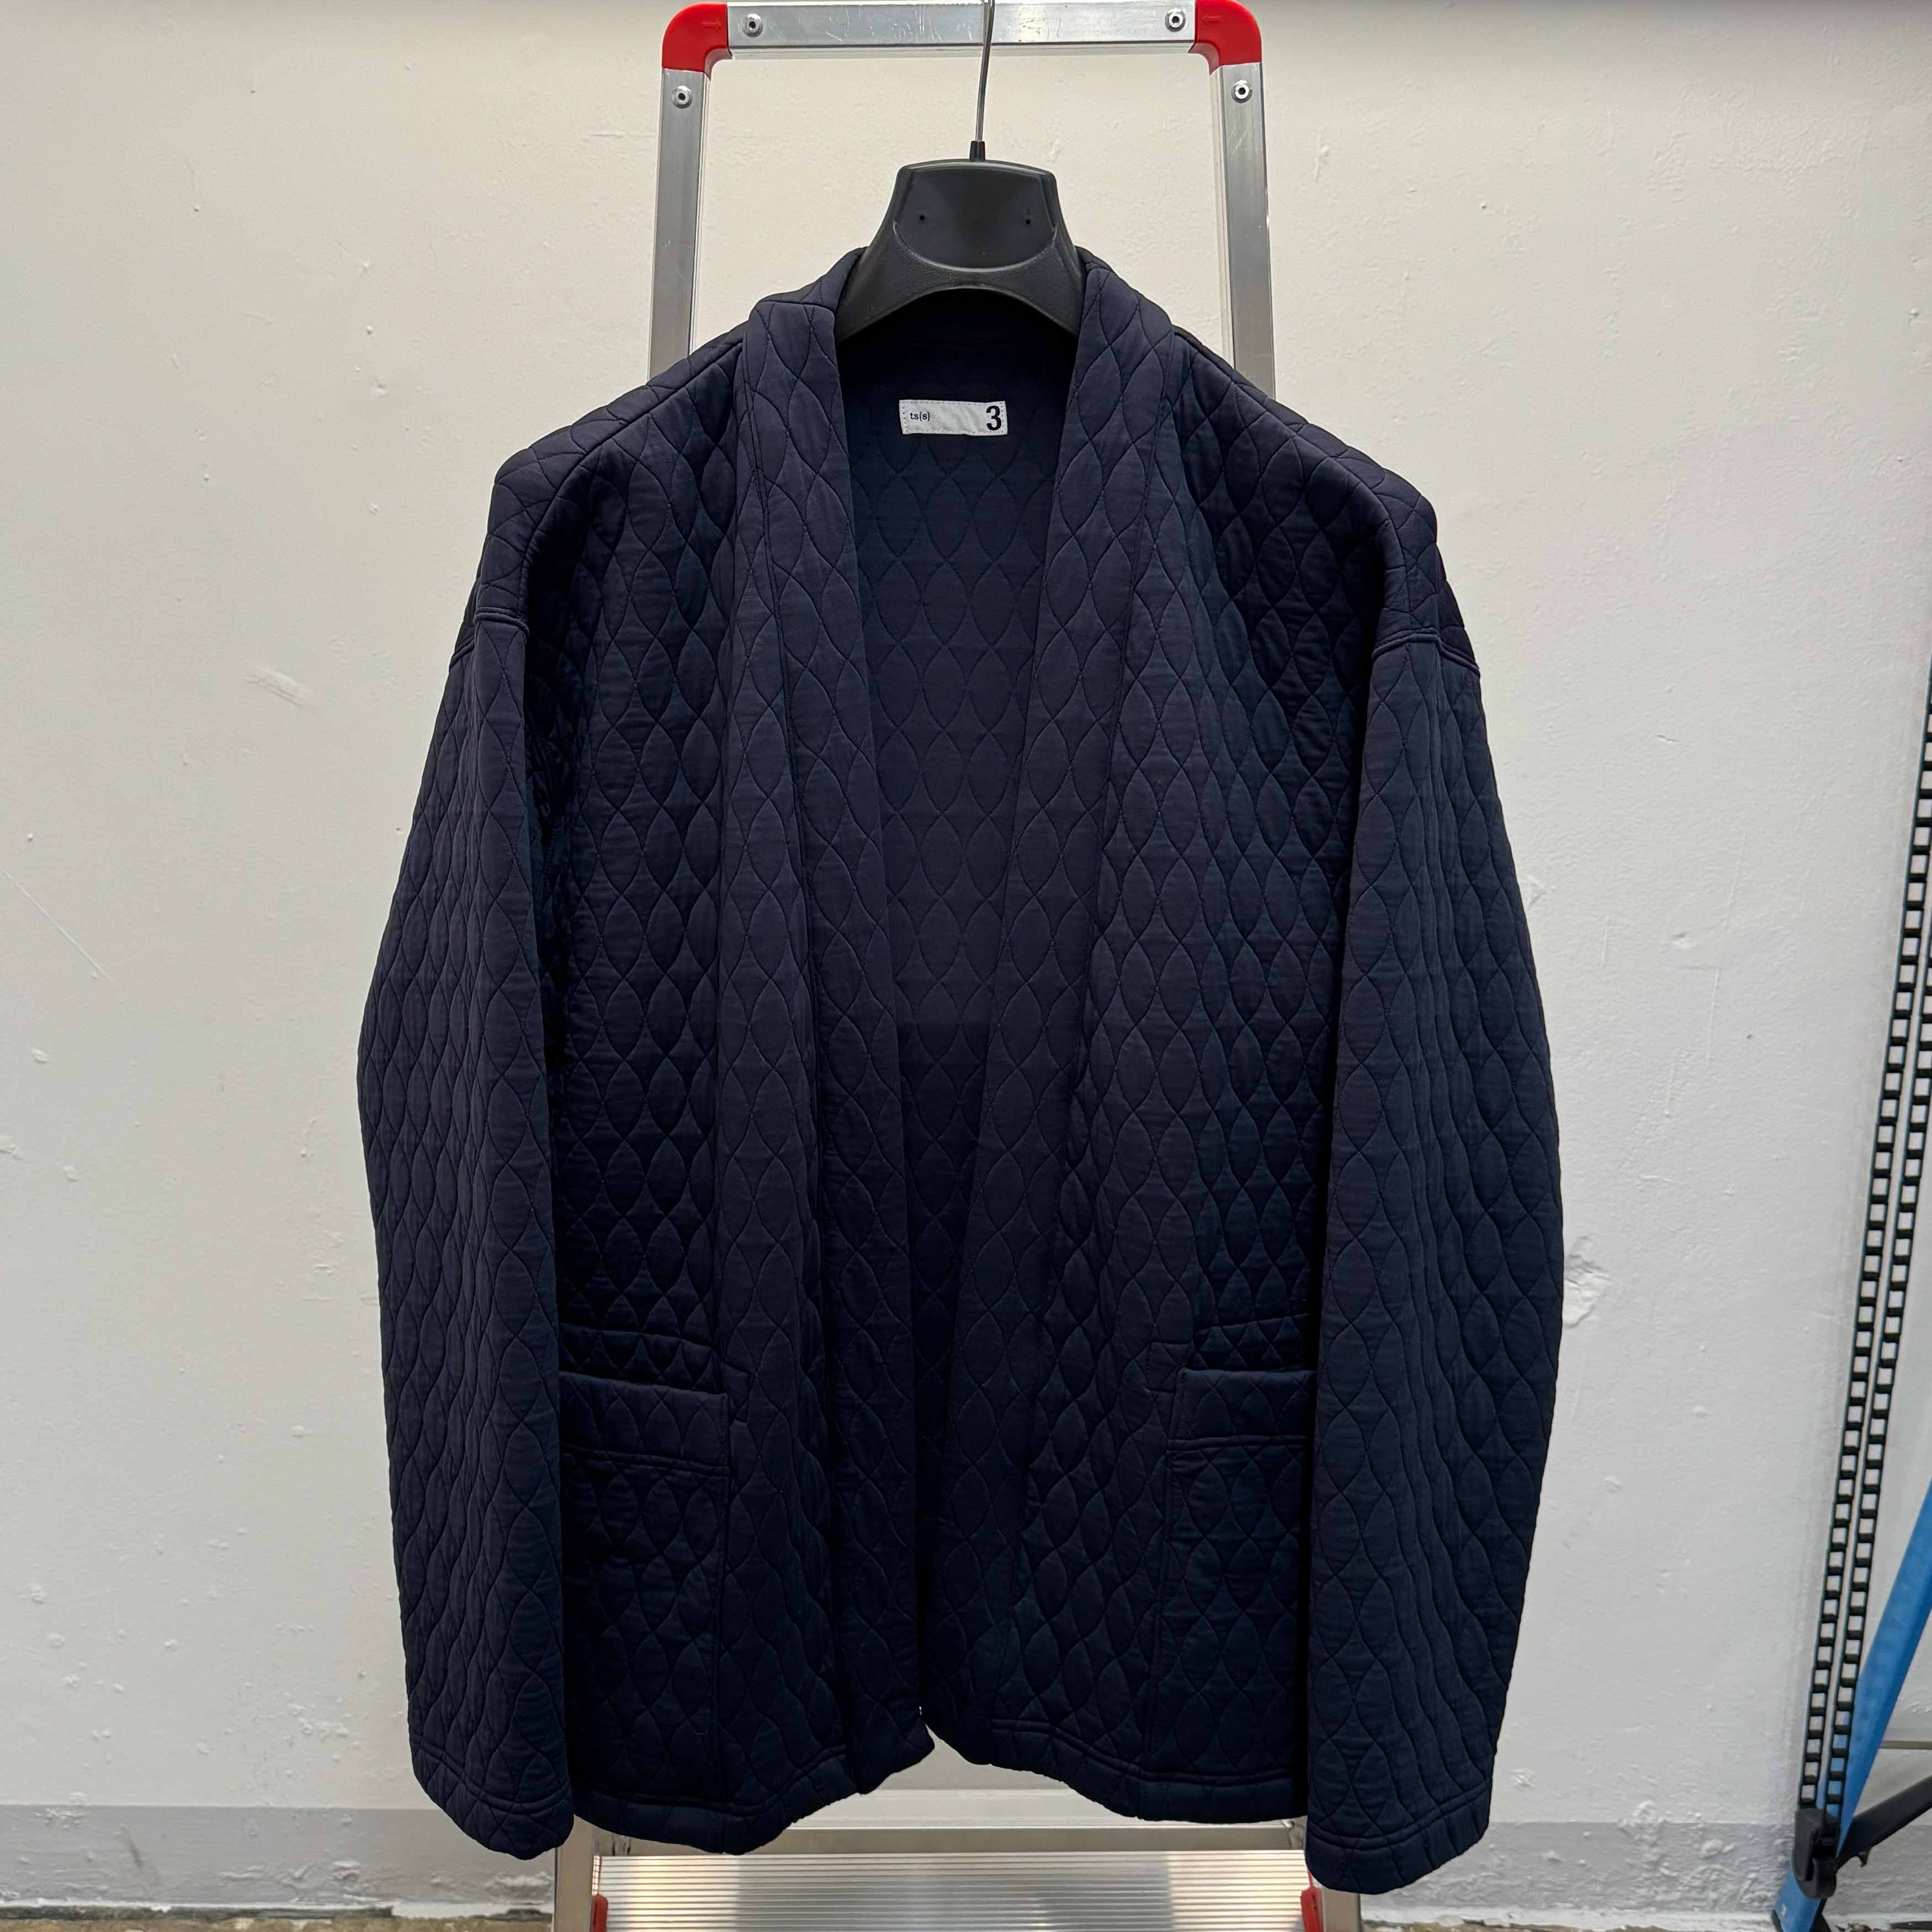 TS(S) POLY QUILT JACQUARD JERSEY EASY CARDIGAN - NAVY